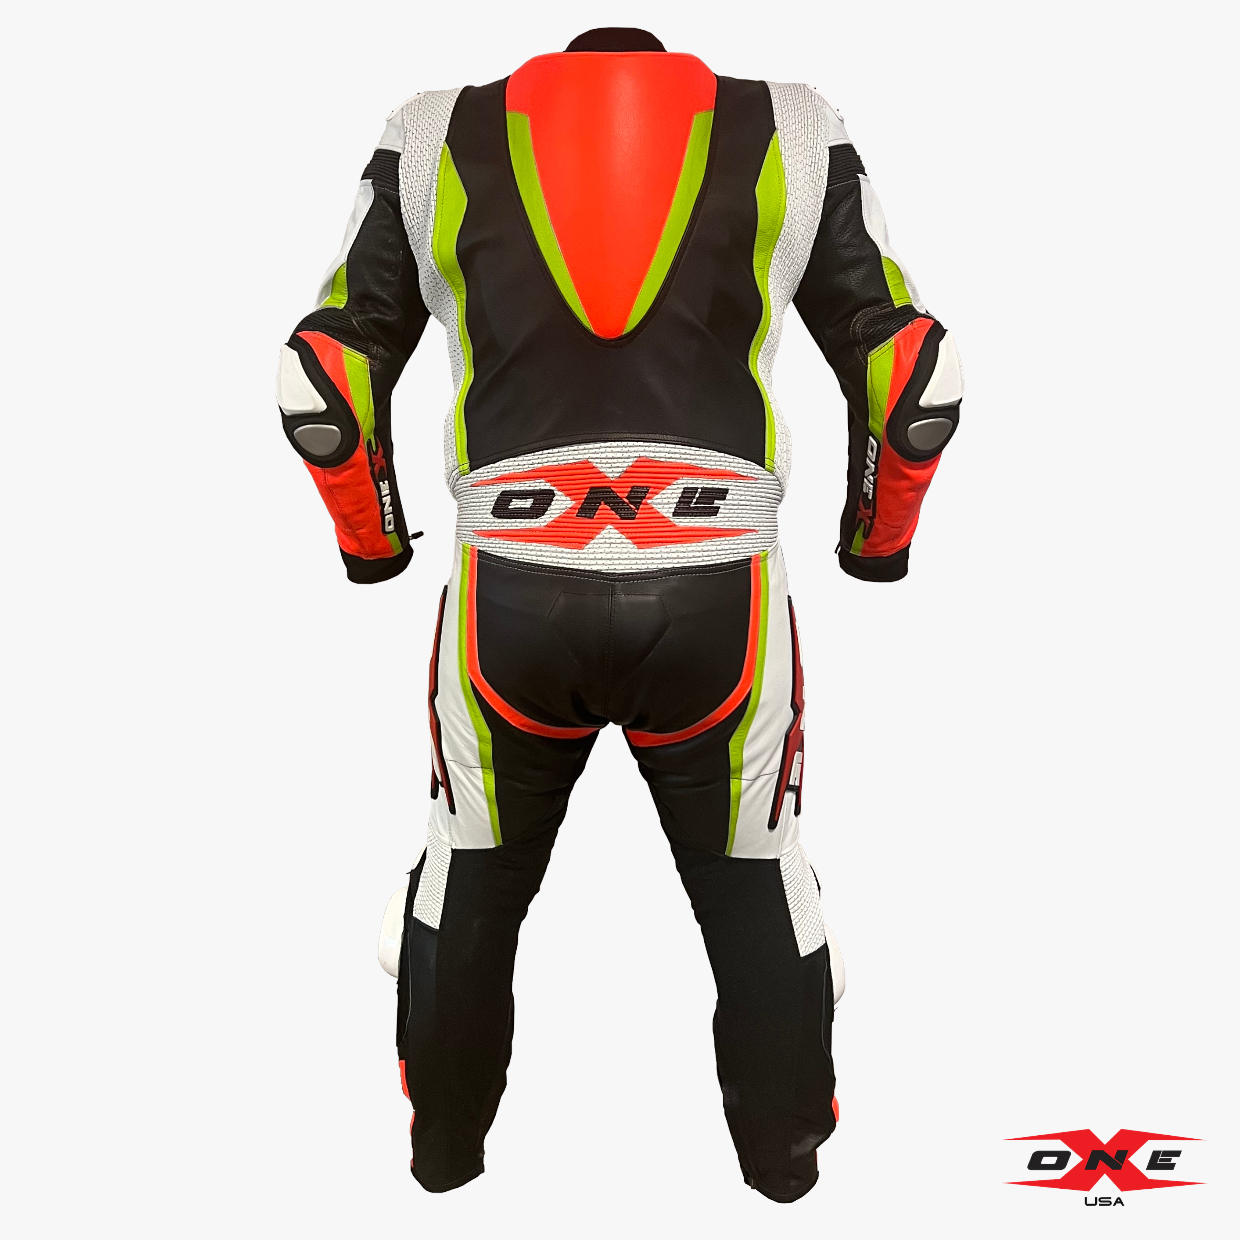 OneX USA XR23 Airbag Ready Pro Race Suit - One Piece - Black and White (Yellow/Fluor Red)